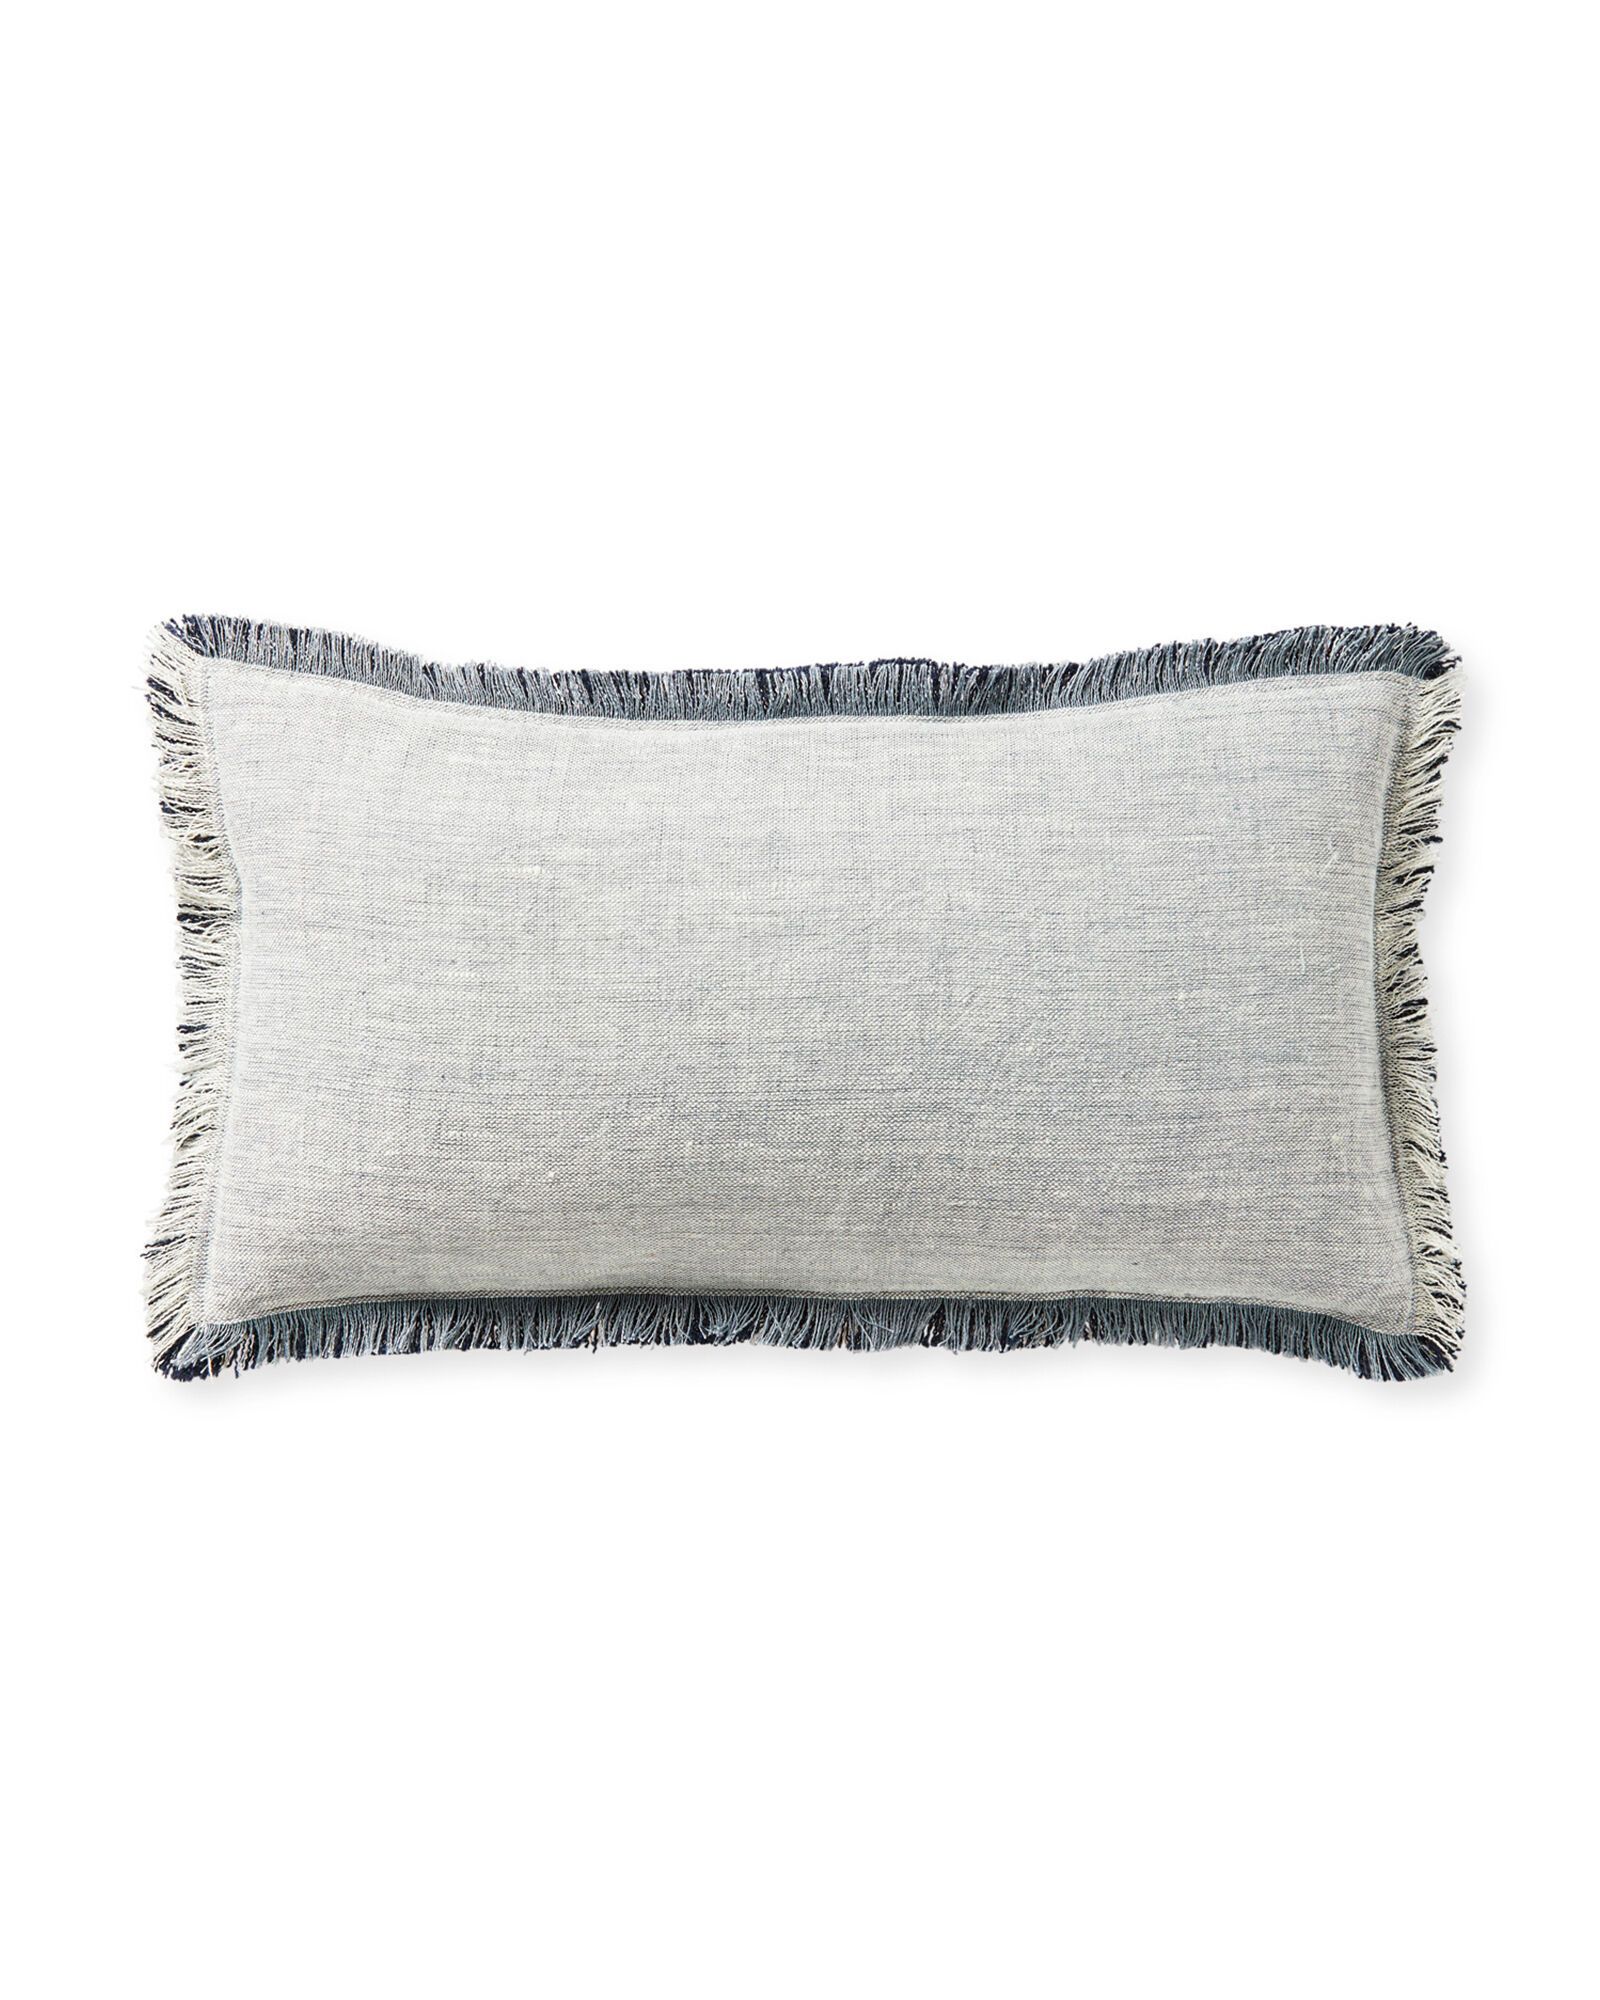 Avalis Pillow Cover | Serena and Lily